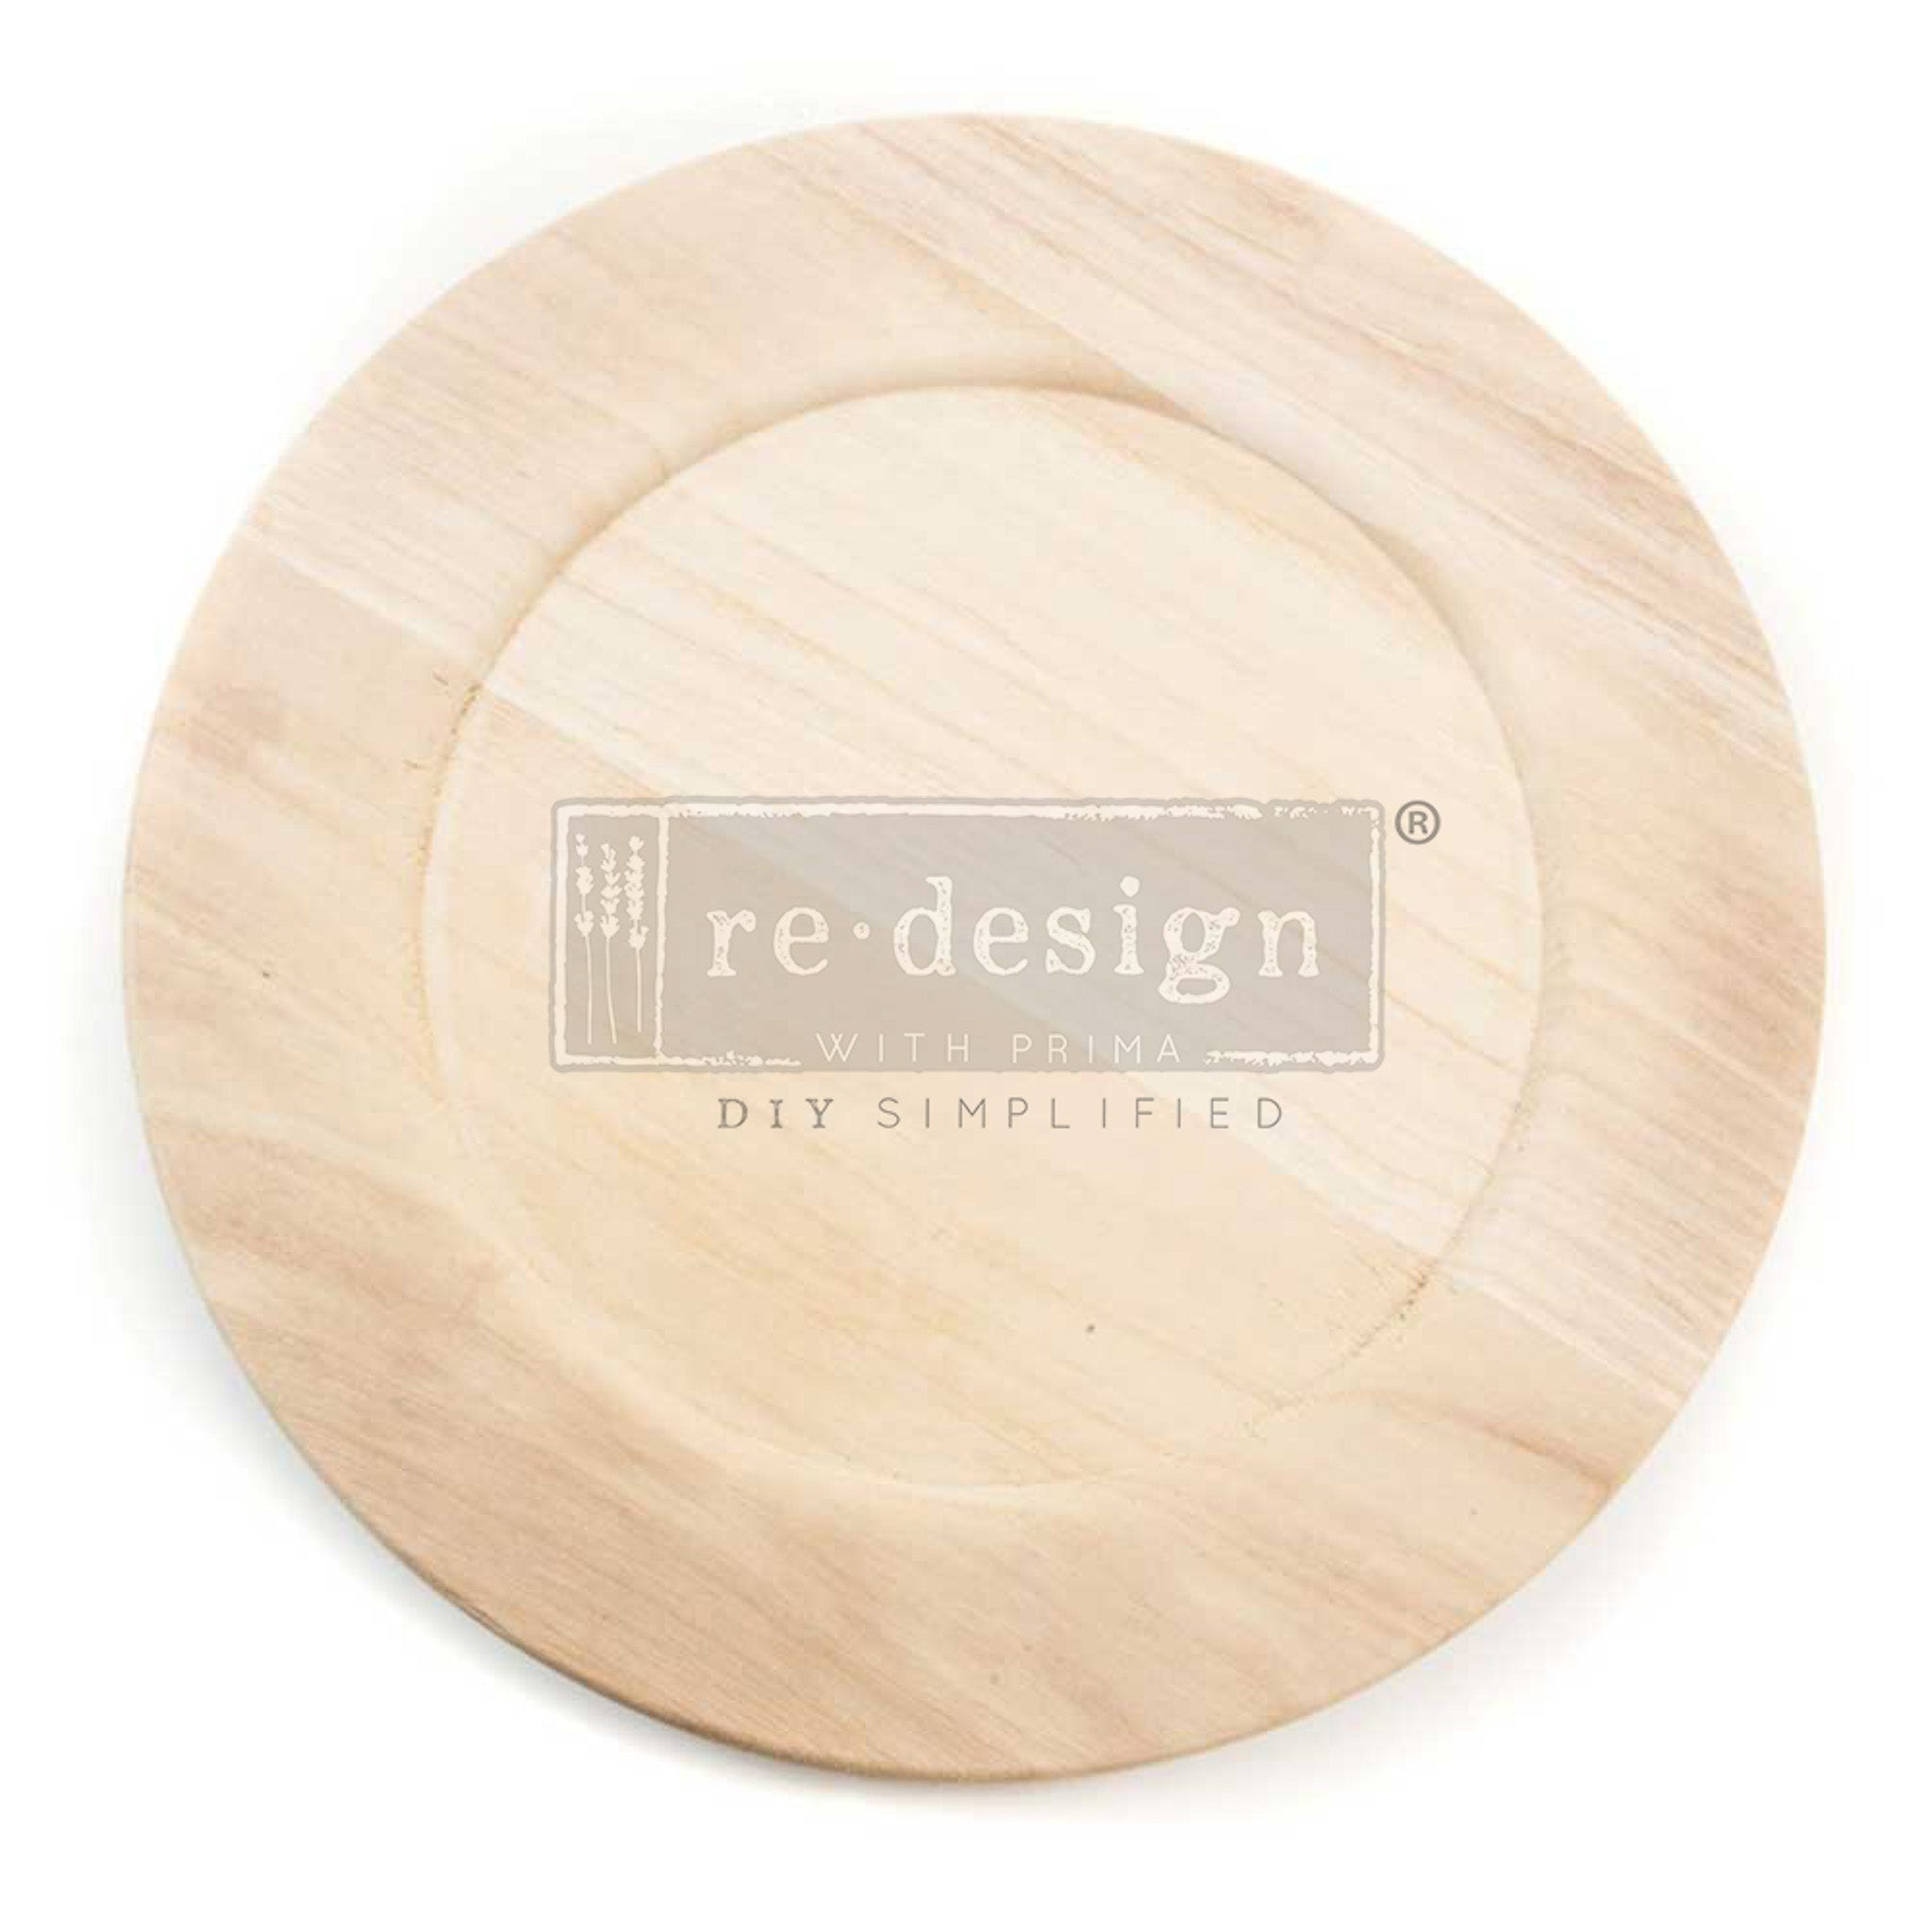 14" wood saucer ready to decorate is against a white background.